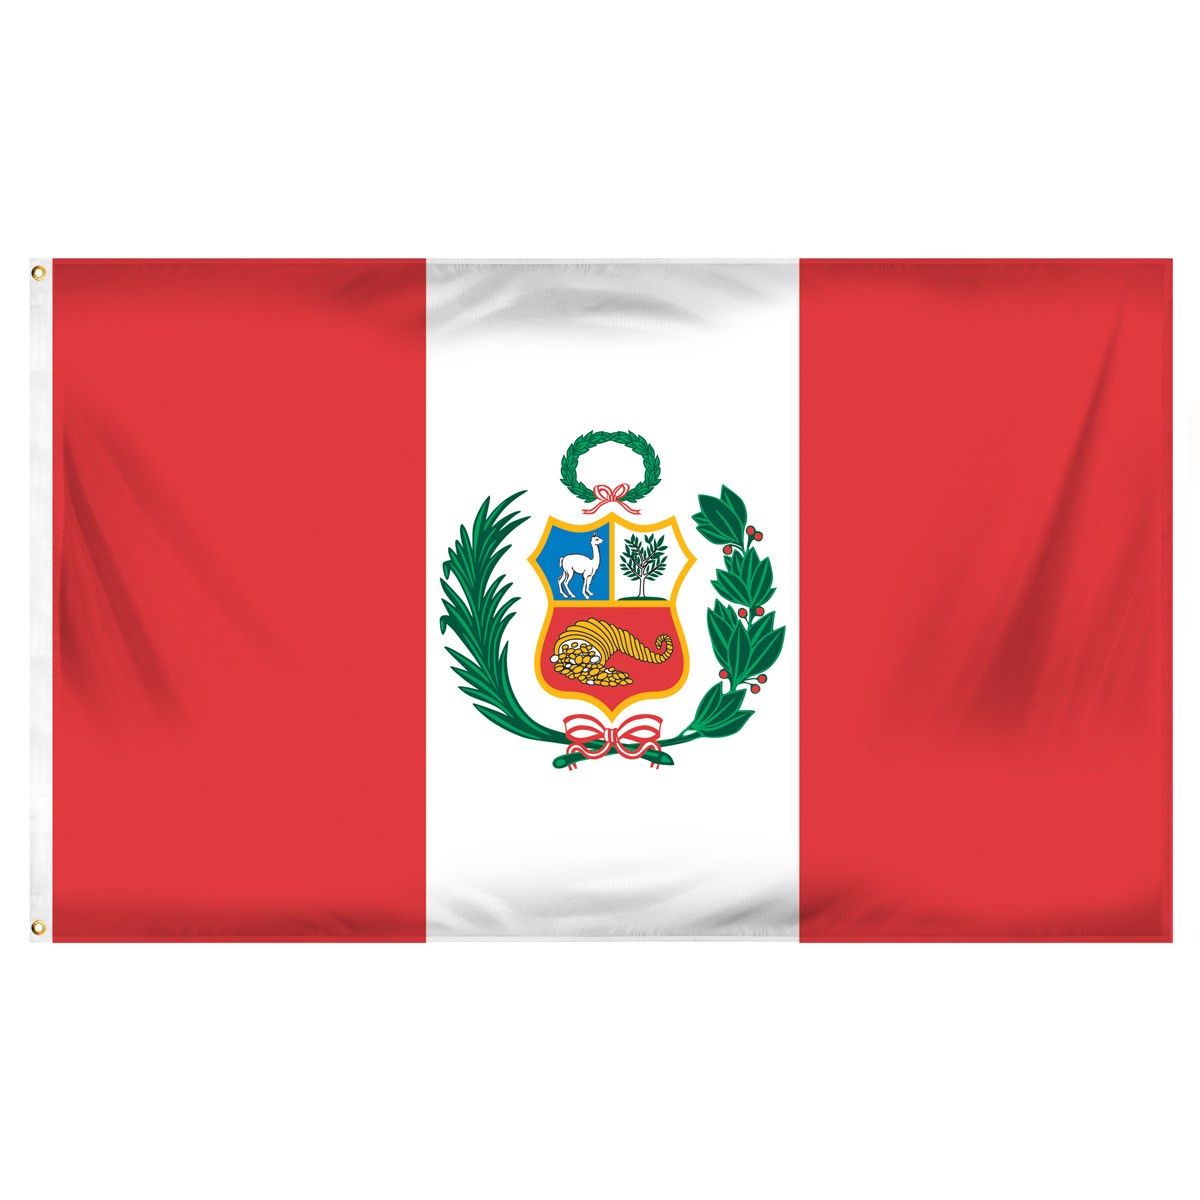 Peru Submit Flags and Flags